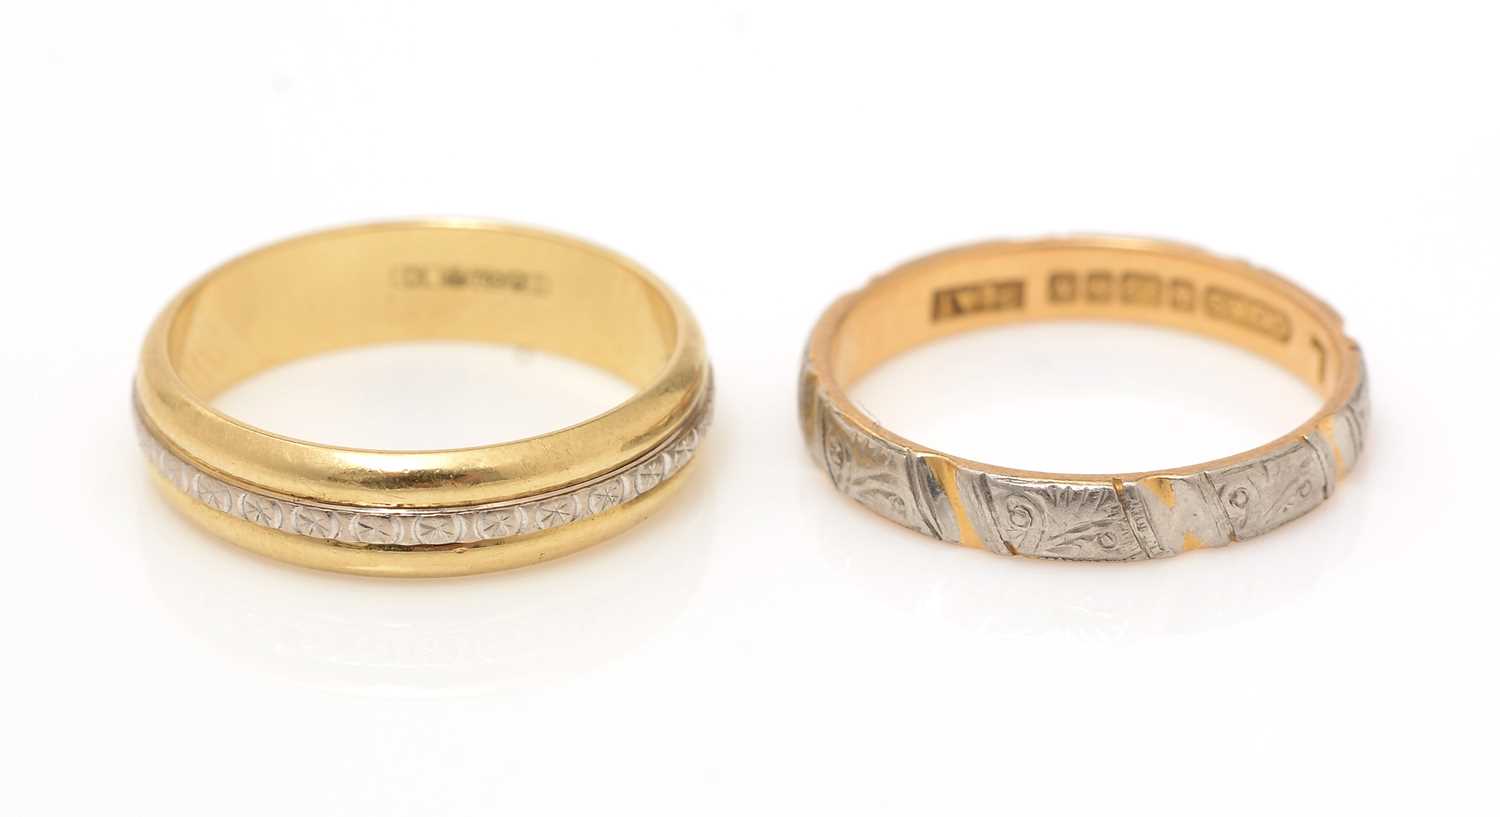 Lot 323 - Two wedding bands